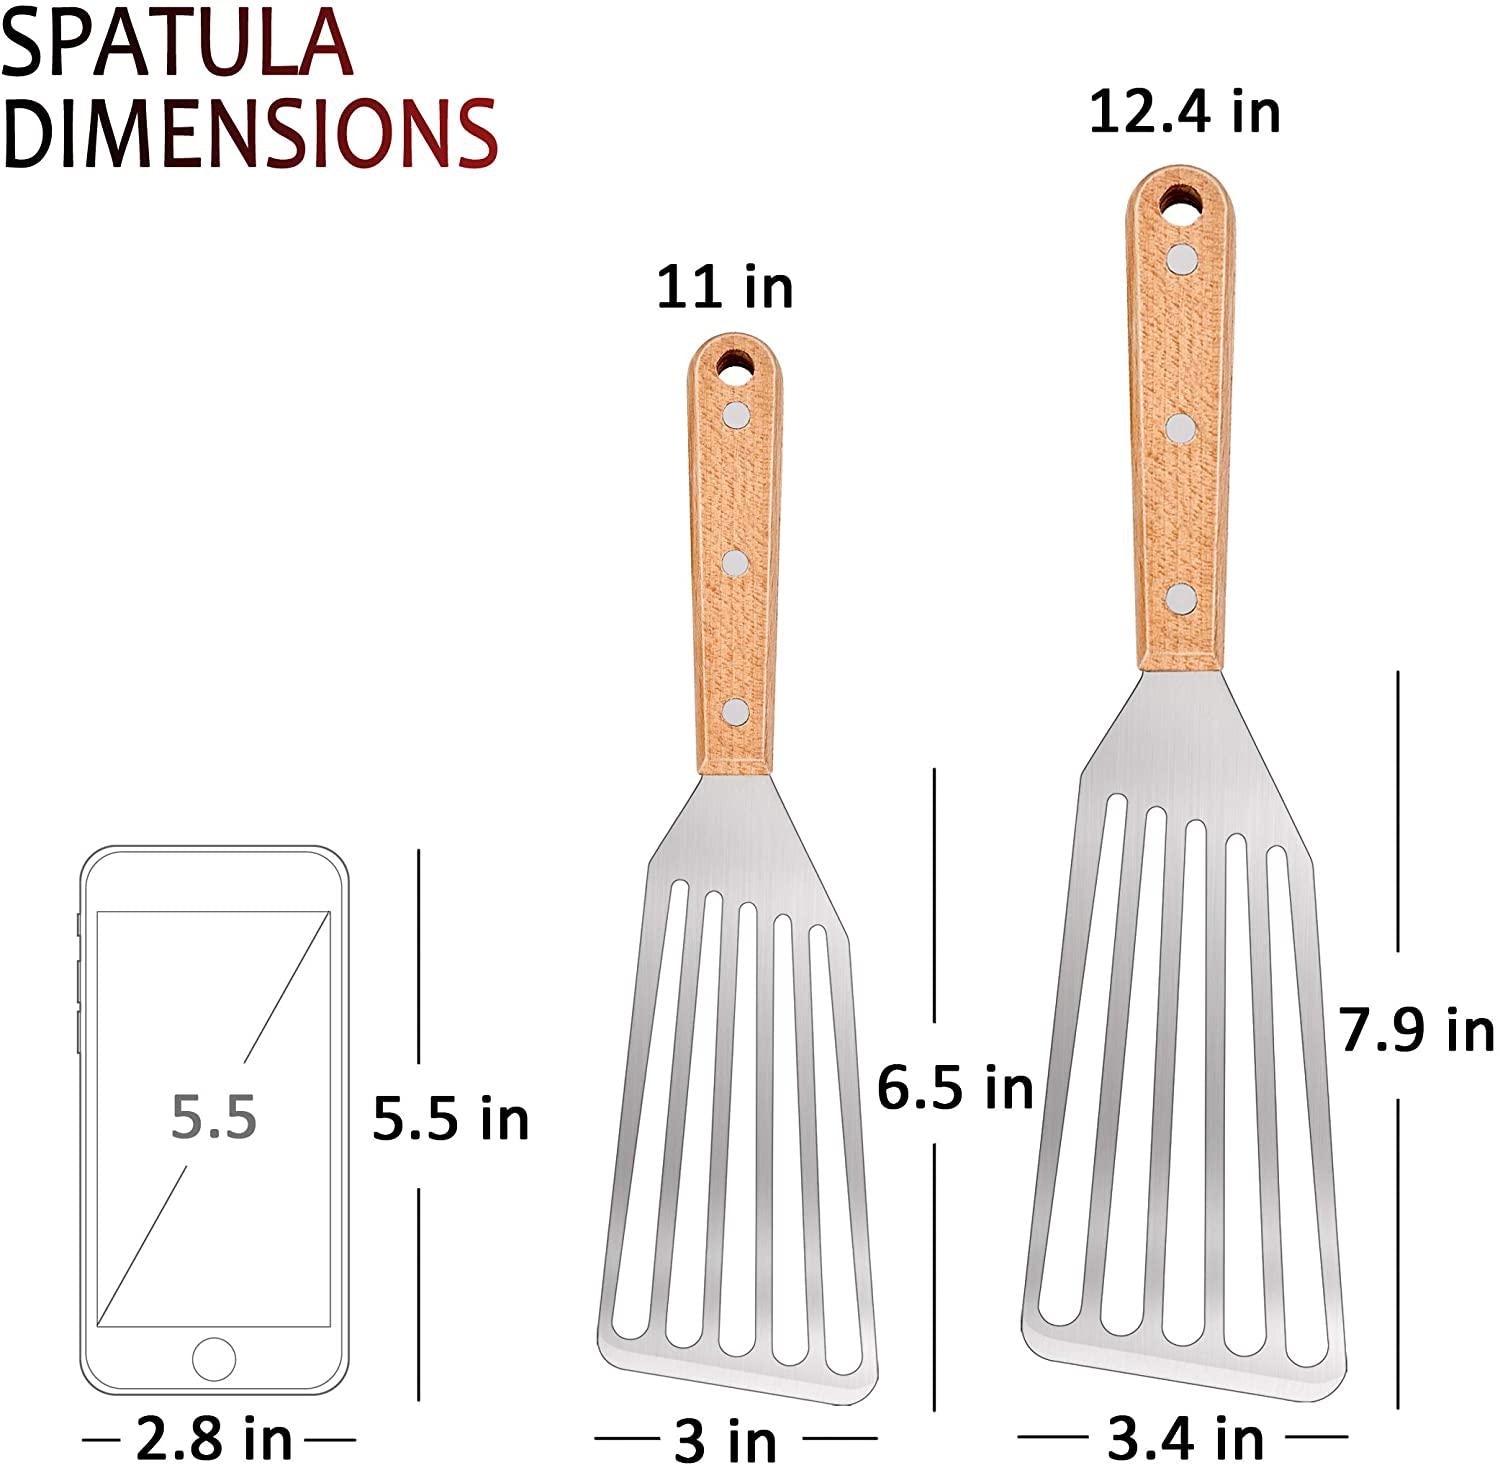 Leonyo, Fish Spatula Turner Set of 2, Leonyo Stainless Steel Slotted Fish Turner, Kitchen Metal Spatula for Flipping Frying Fish Meat Eggs Pancakes, Thin Edge and Wooden Grip, Two Size, 12.4-inch and 11-inch